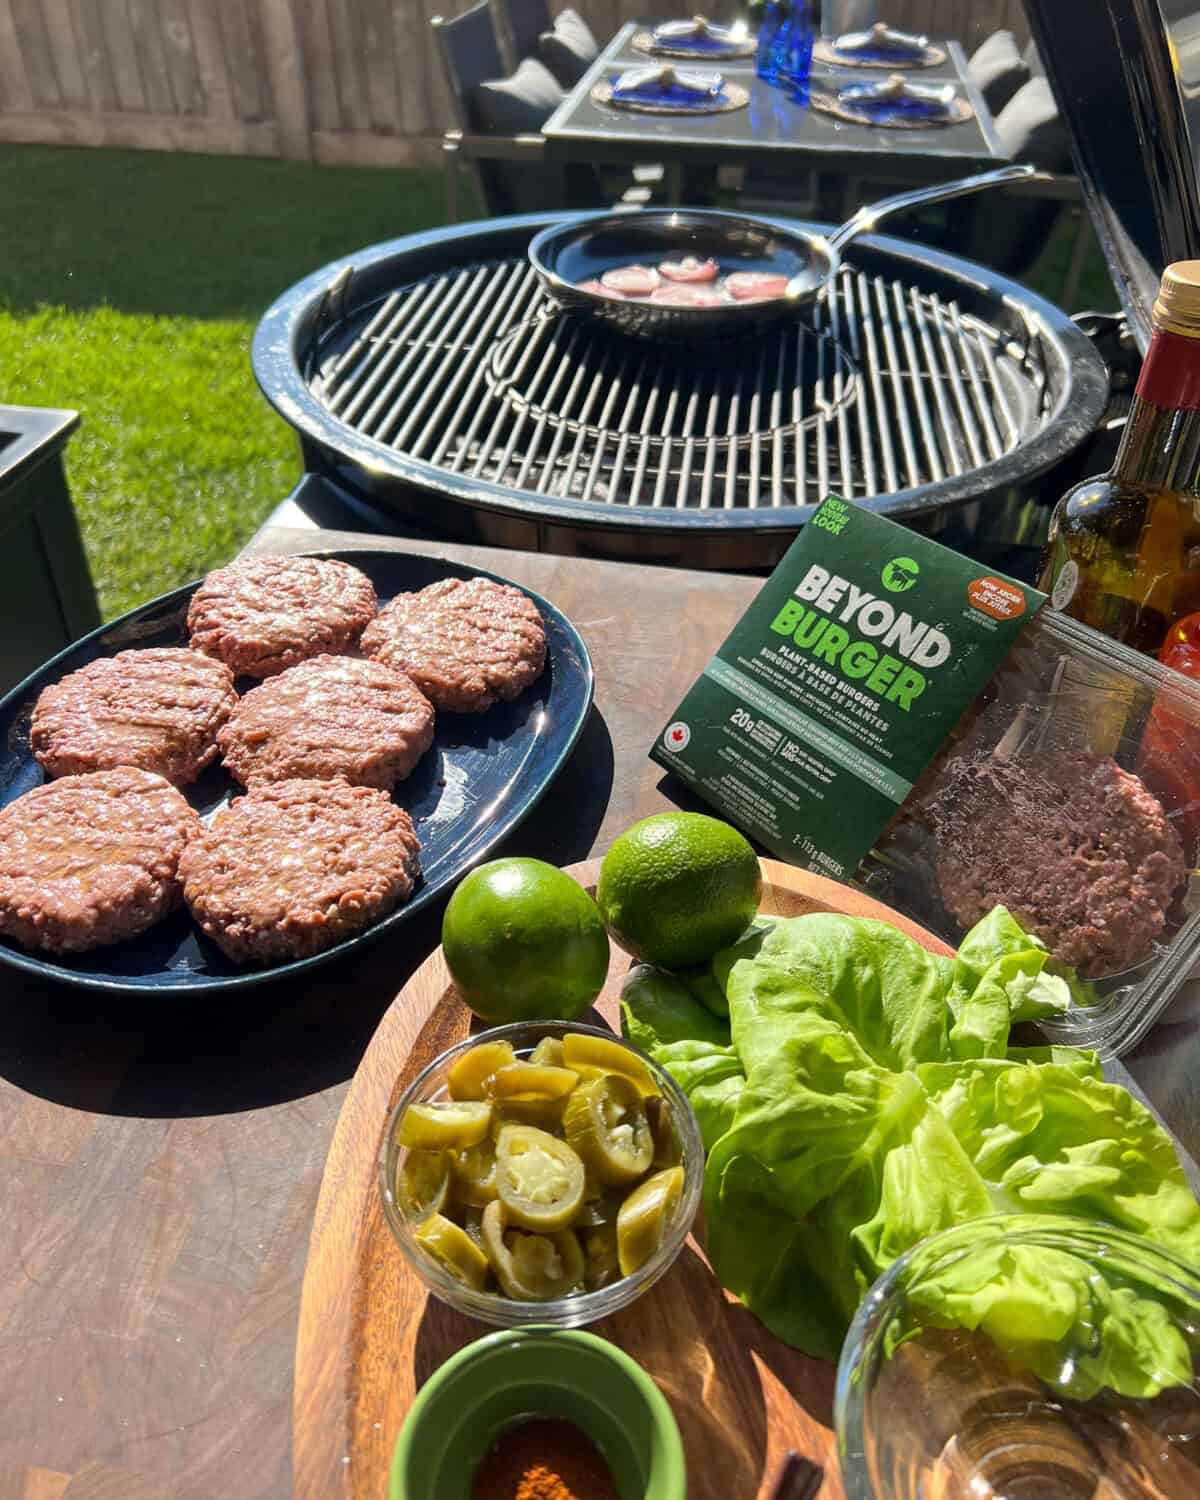 Burger patties and toppings are beside a bbq ready to be cooked.